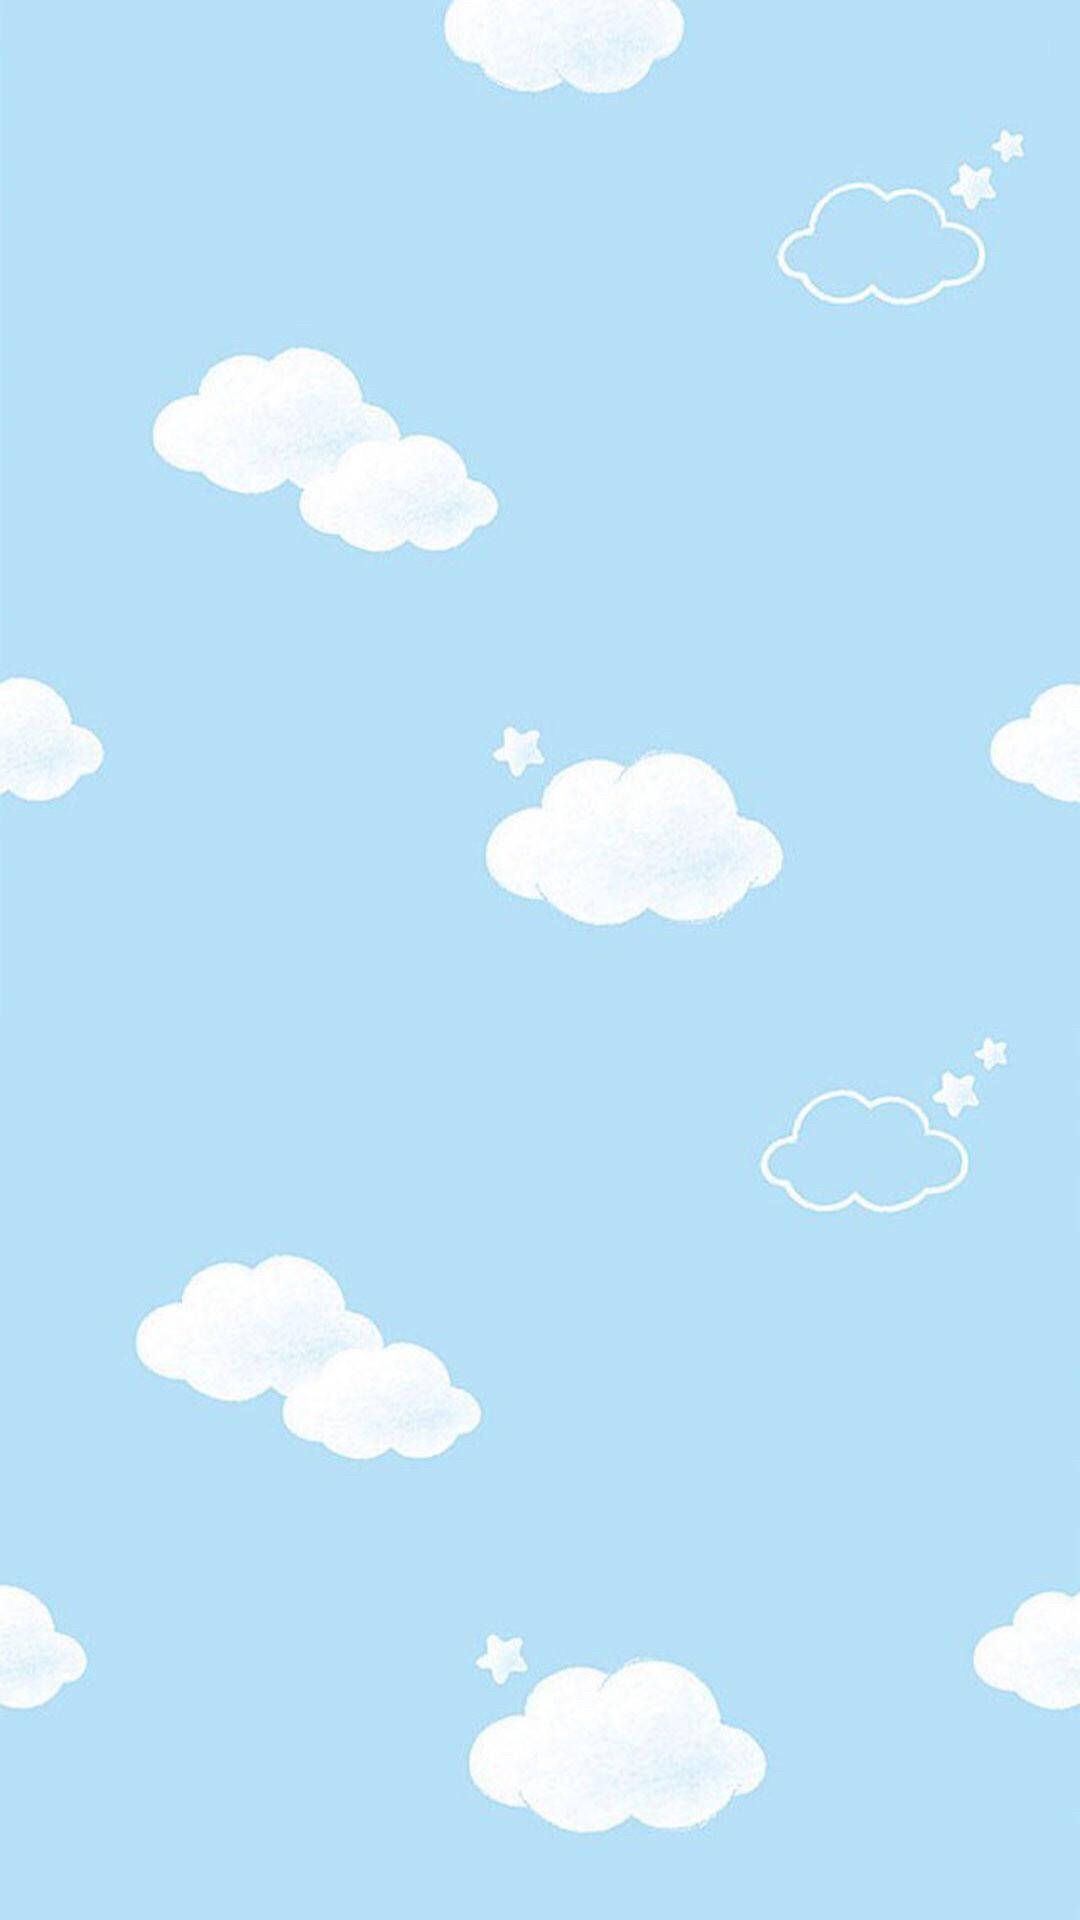 A blue background with white clouds and stars. Aesthetic. - Blue, cute, light blue, pastel blue, pretty